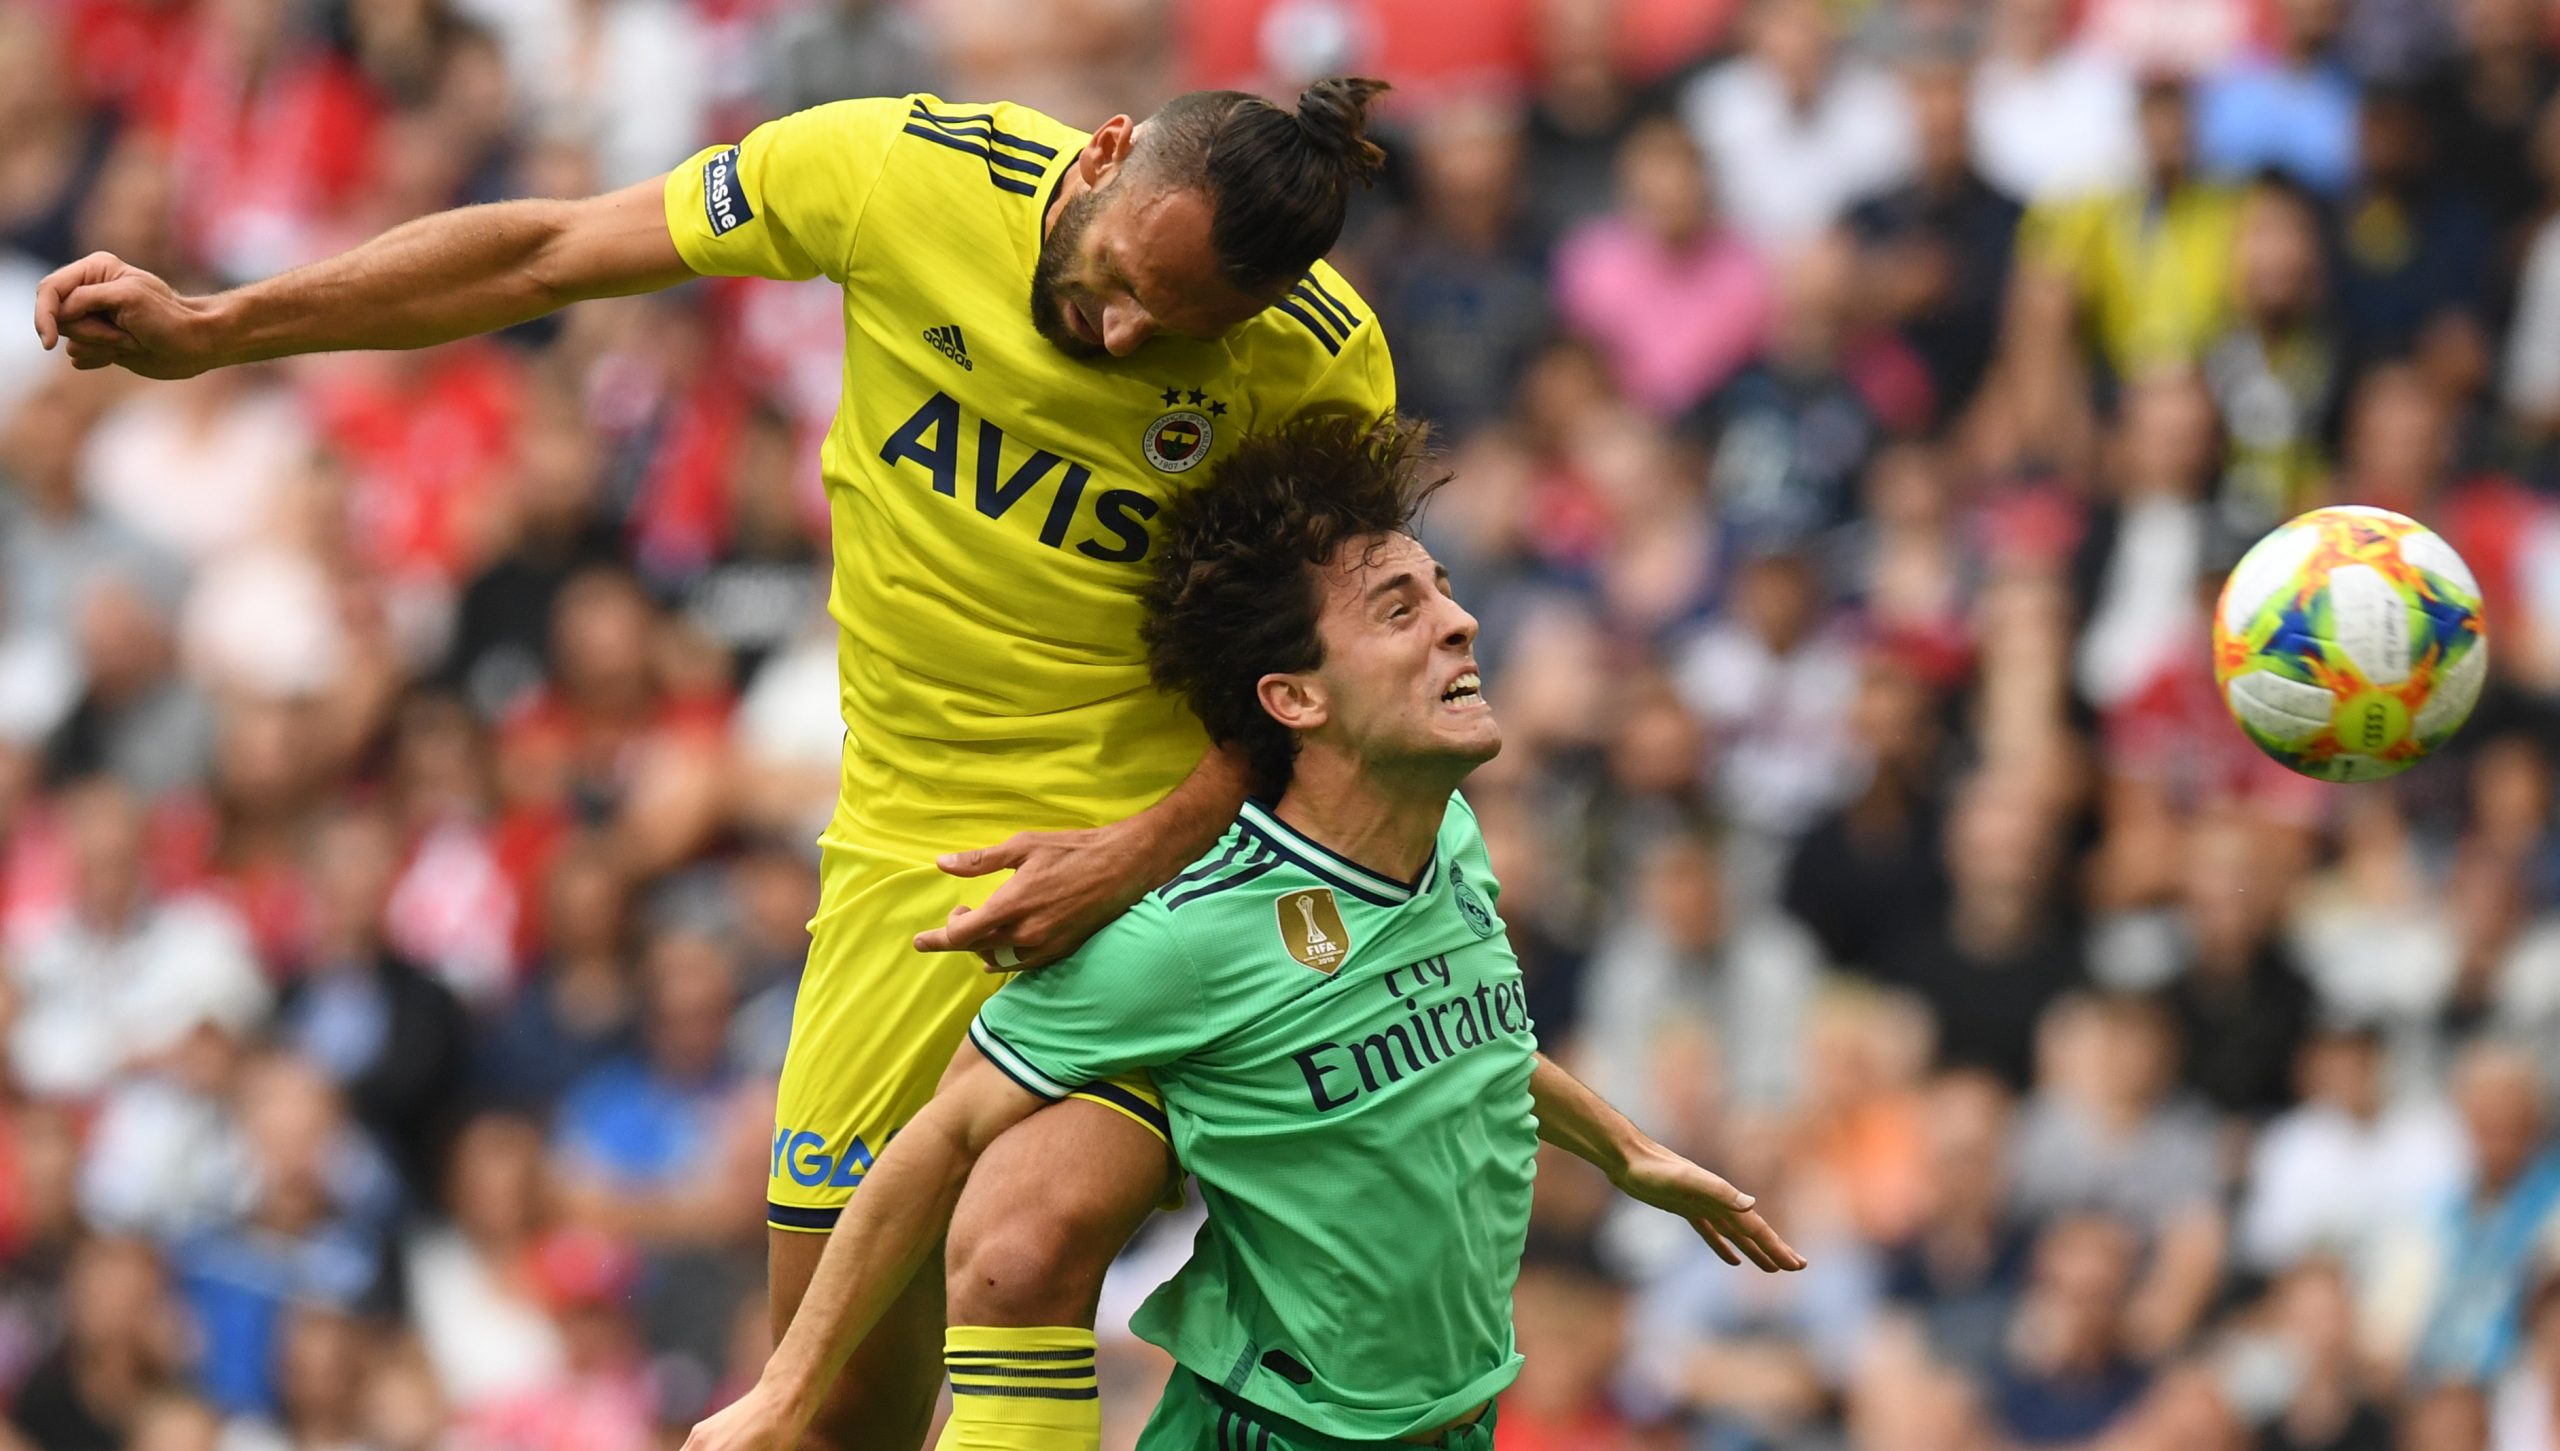 Fenerbahce's Kosovan striker Vedat Muriqi and Real Madrid's Brazilian forward Vinicius Junior (R) vie for the ball  during the Audi Cup football match for third place between Real Madrid and Fenerbahce in Munich, on July 31, 2019. (Photo by Christof STACHE / AFP)        (Photo credit should read CHRISTOF STACHE/AFP/Getty Images)